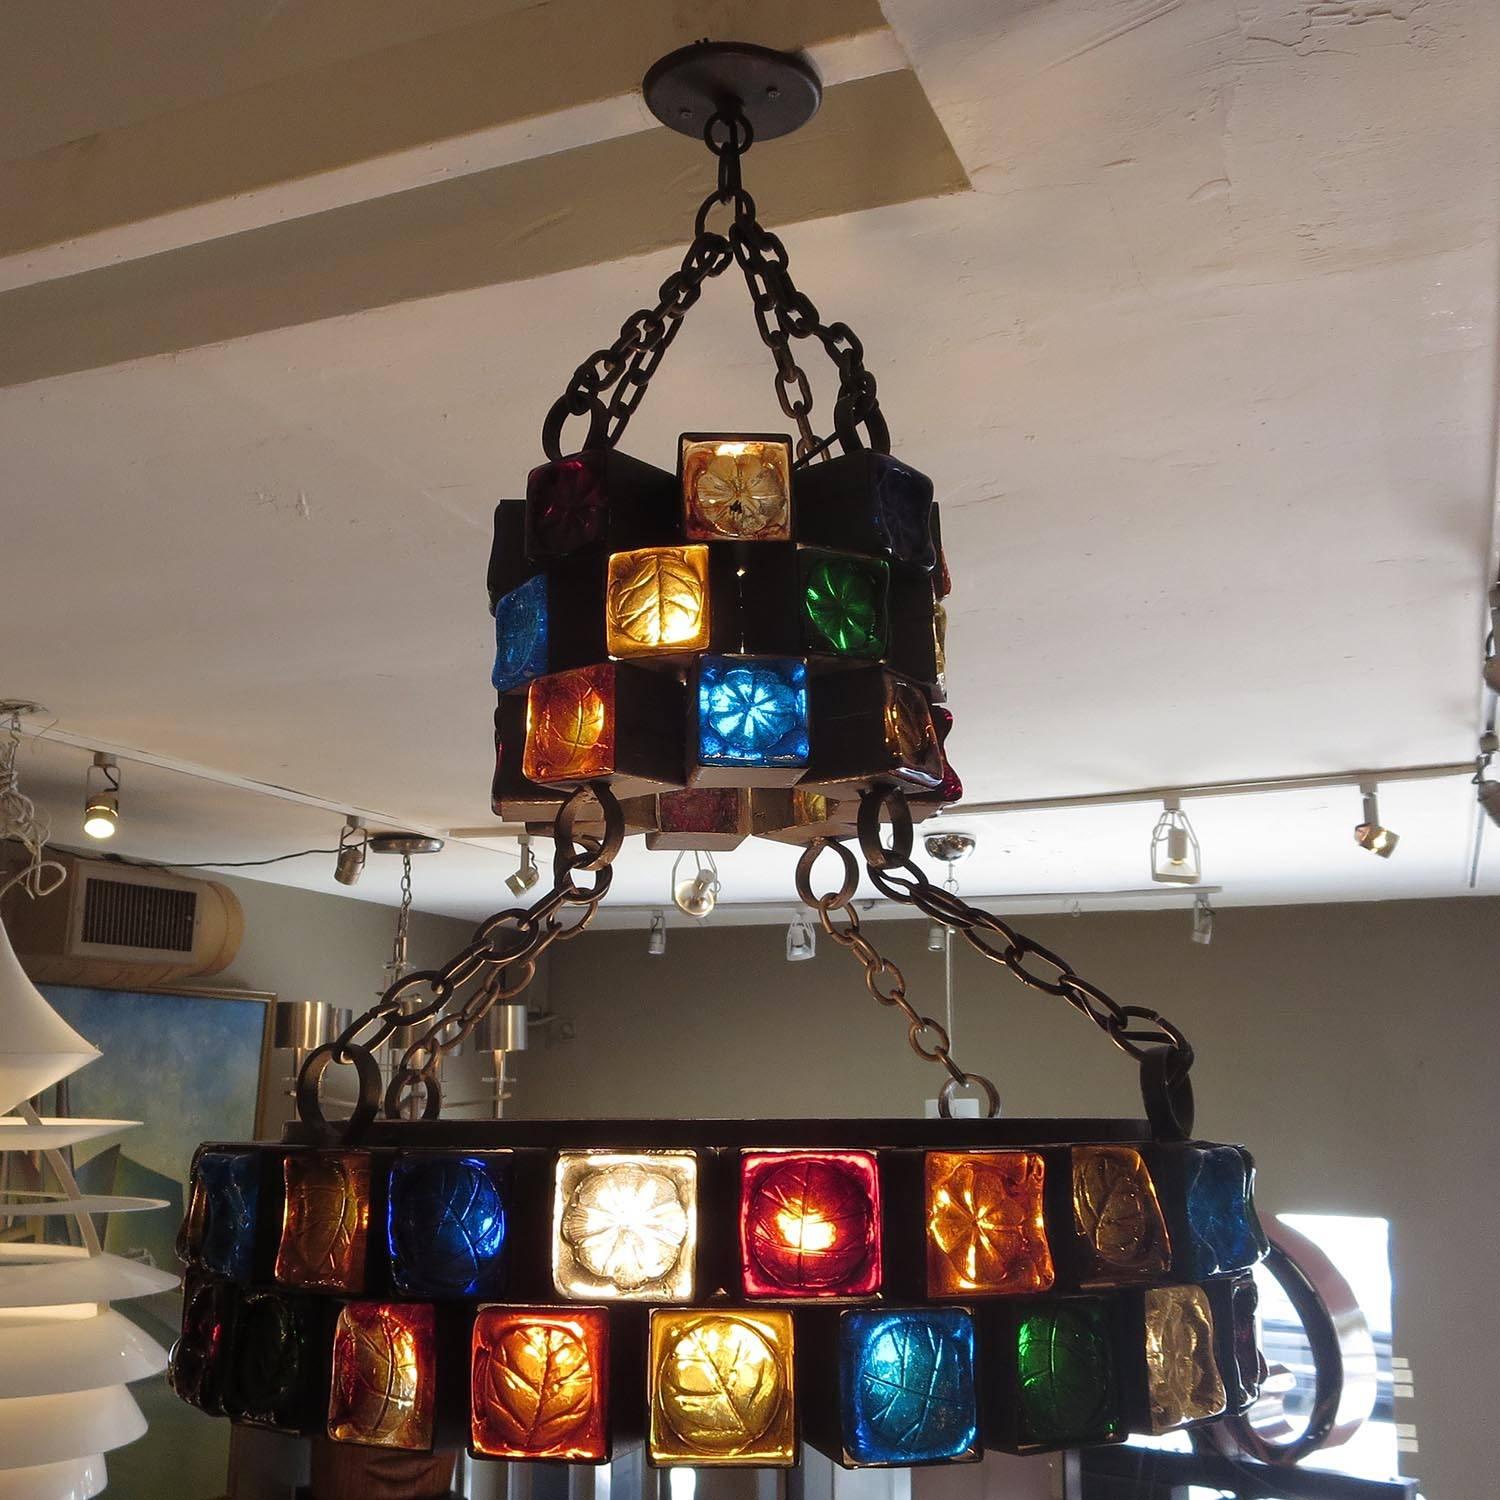 This fantastic lamp was designed by Feder of Mexico, circa 1960s. Each of the 69 steel cubes houses a colored molded glass face with an impressed leaf pattern. This is the largest and most elaborate chandelier we have encountered from the company.